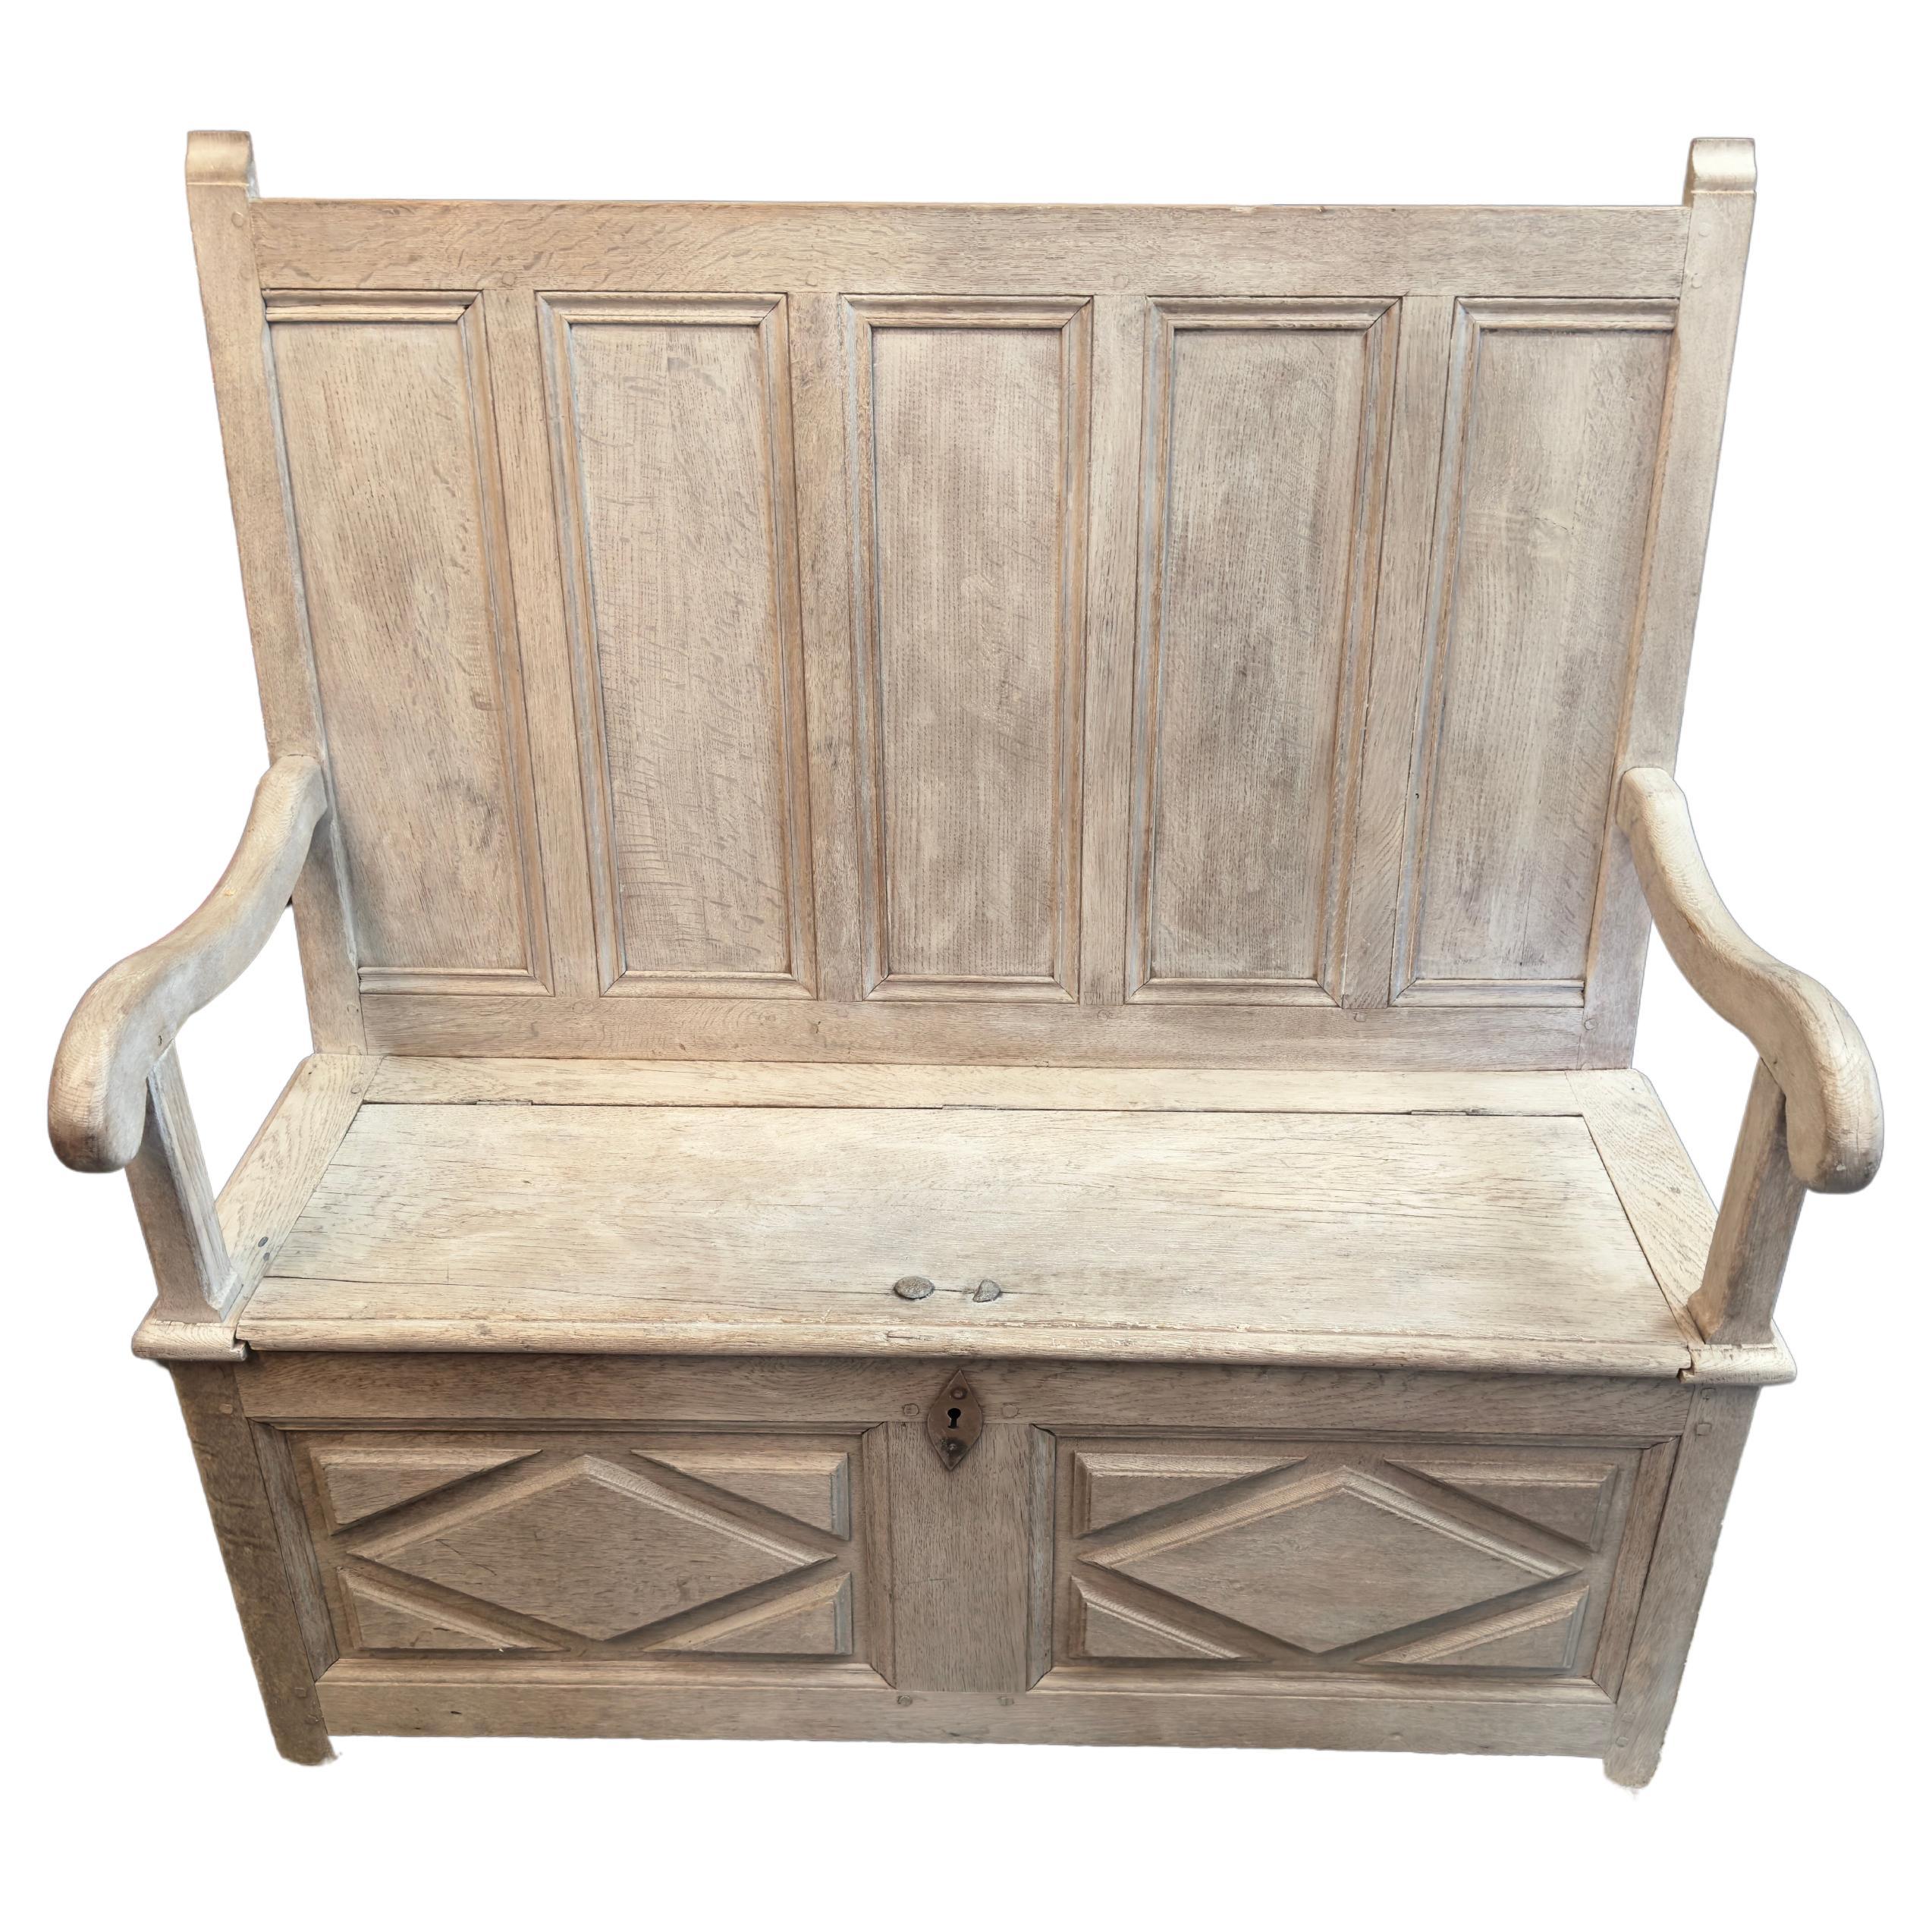 19th Century Bleached English Oak Carved Settle Bench